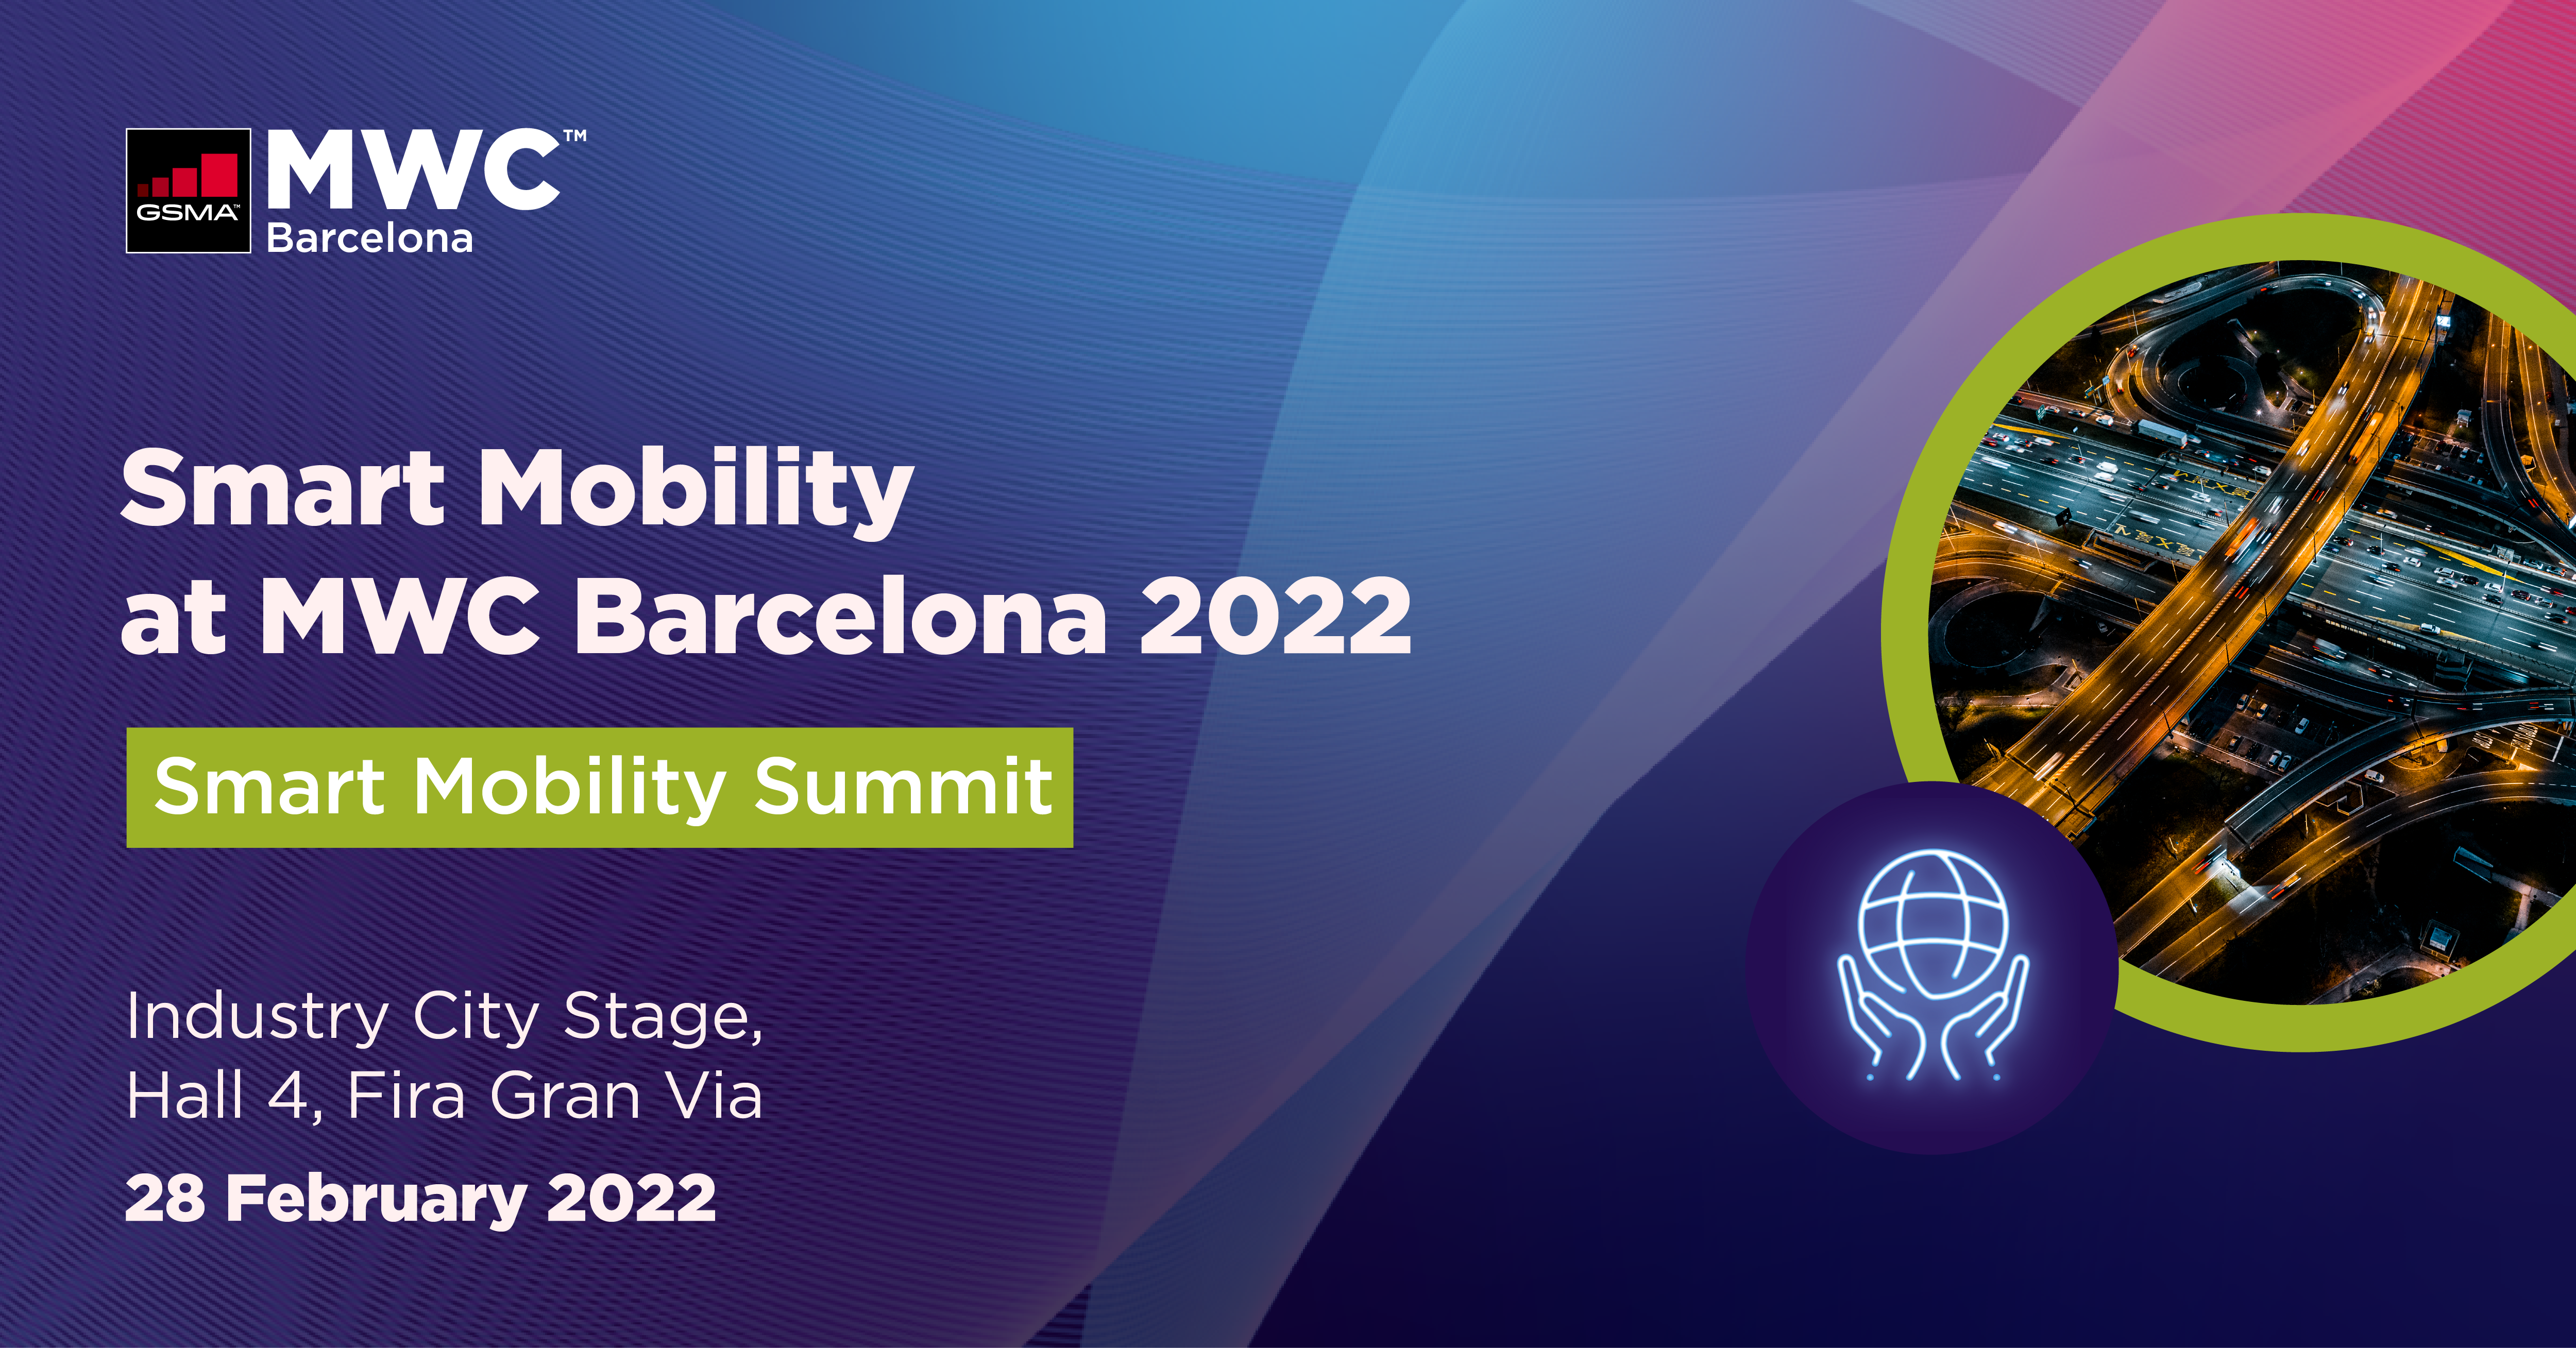 Smart Mobility Summit at MWC Barcelona 2022